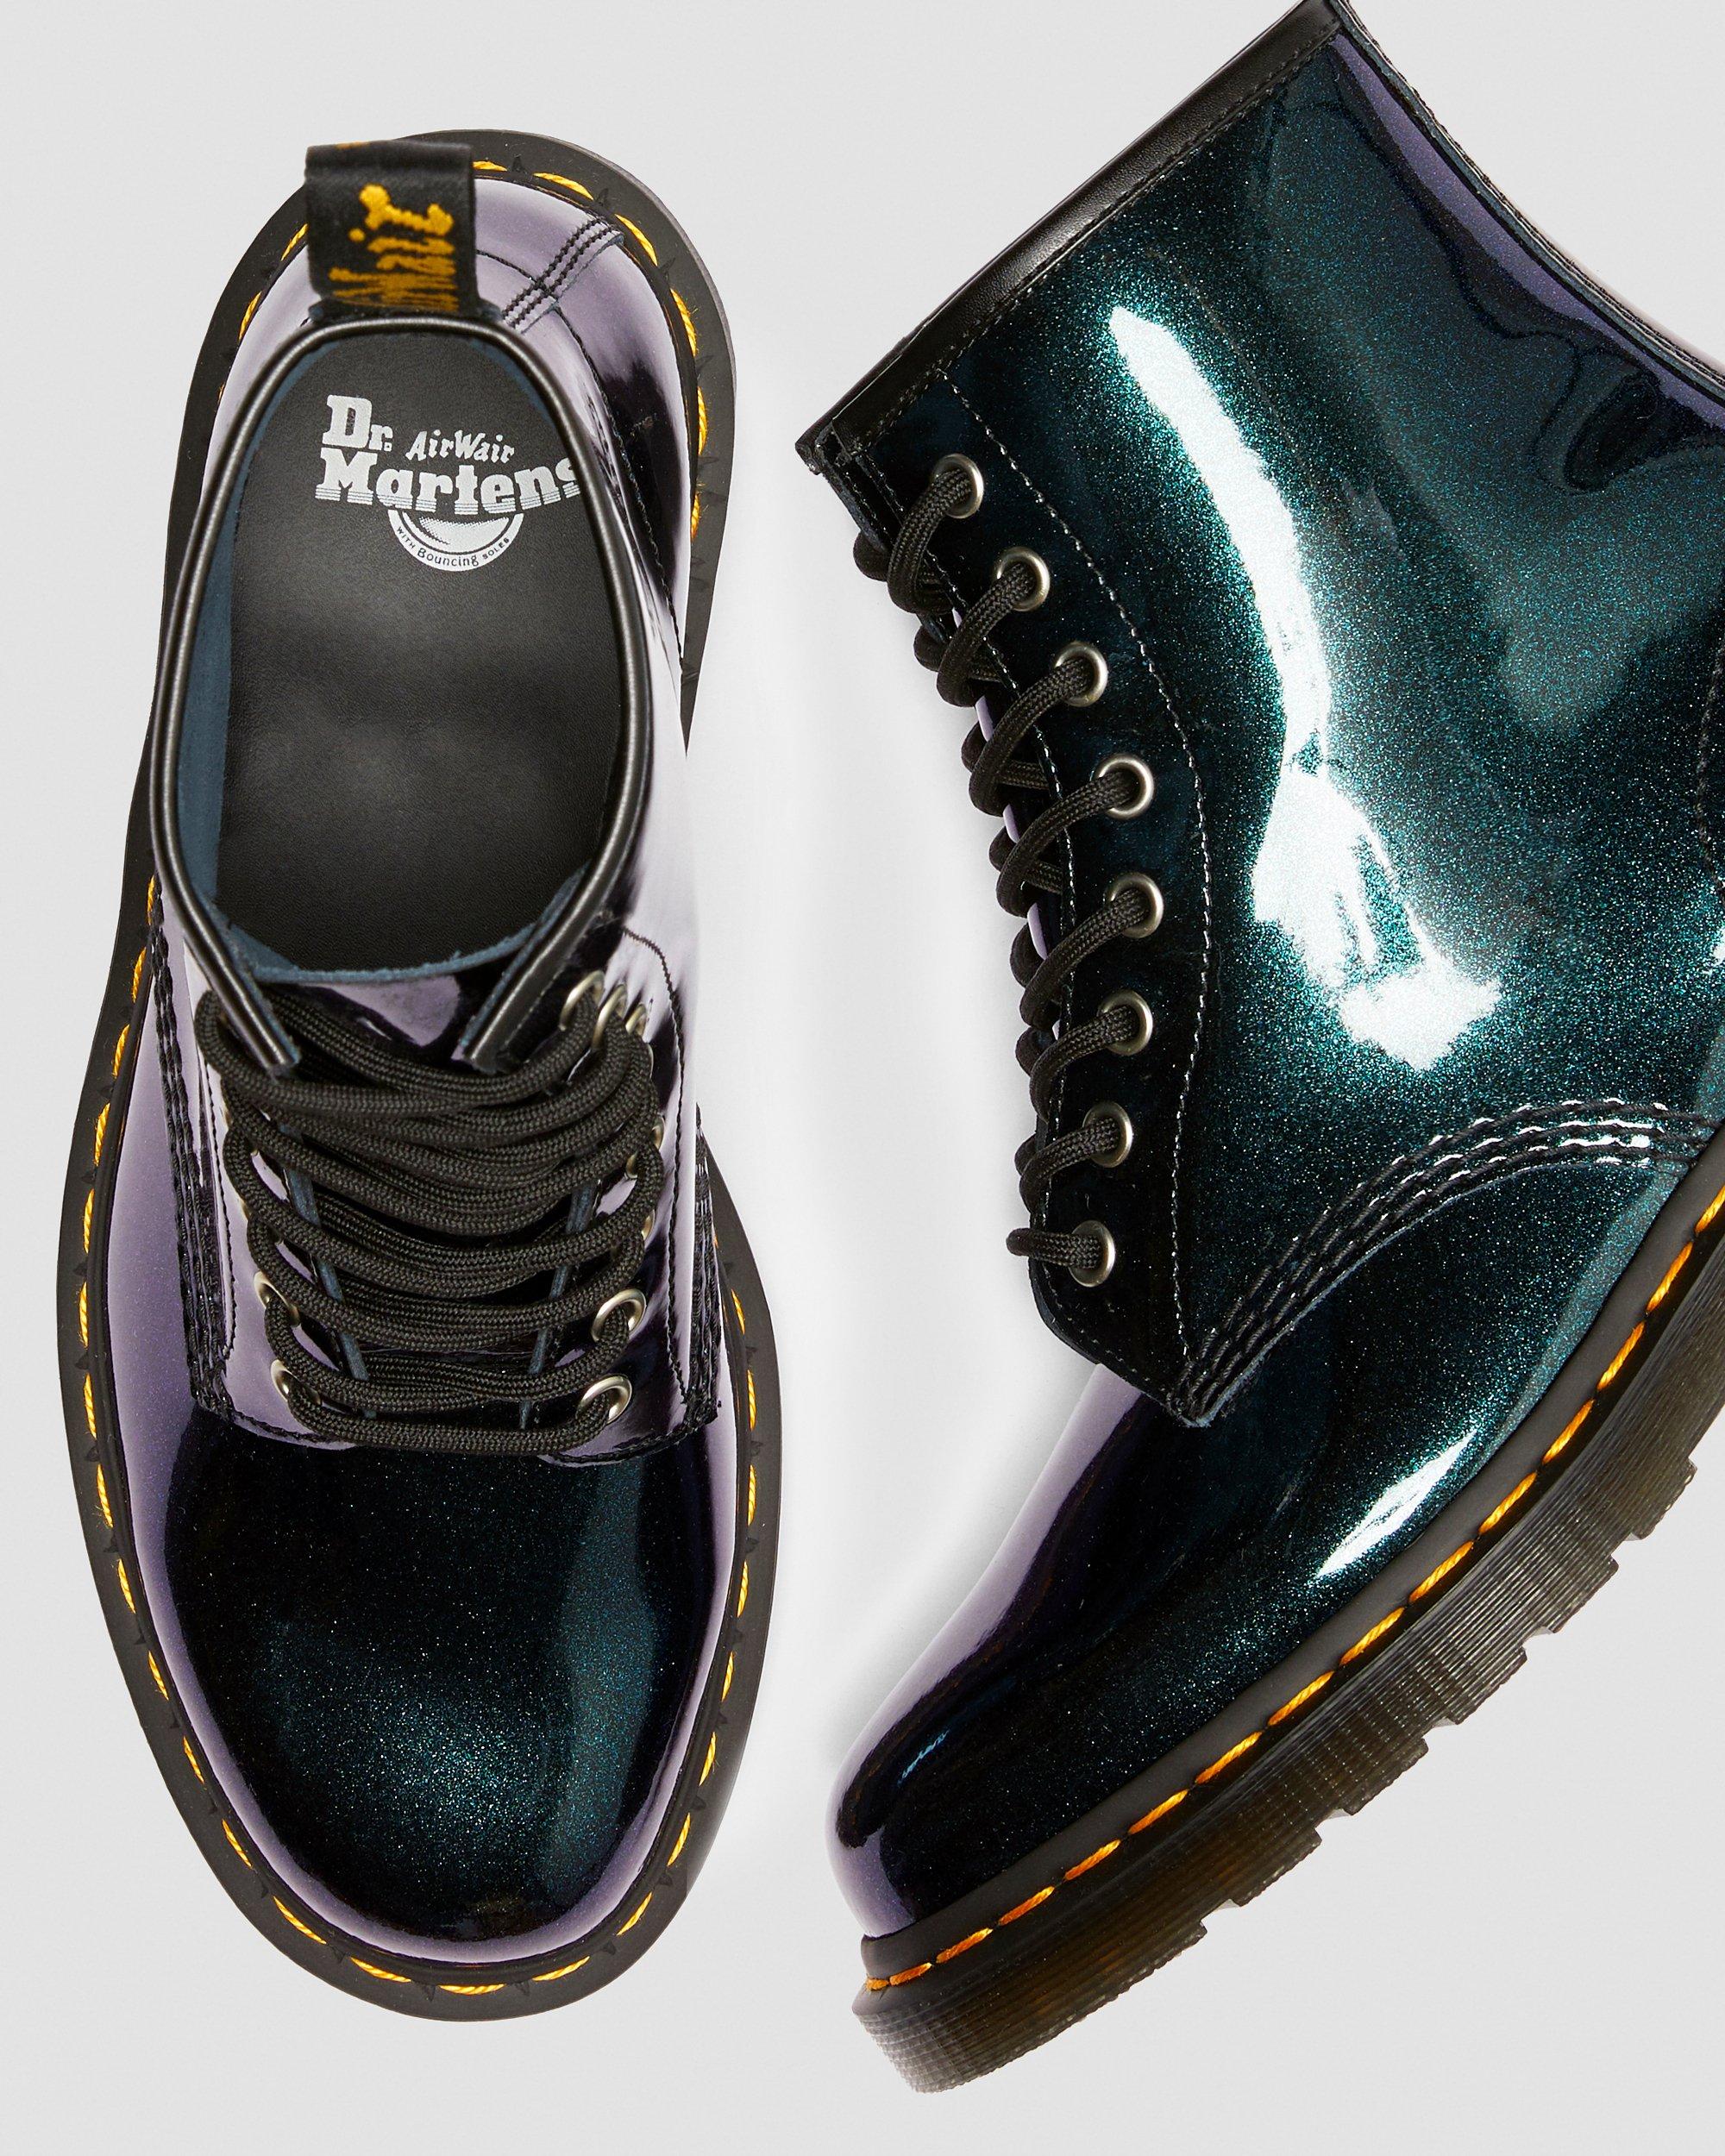 Boots 1460 Sparkle in Teal